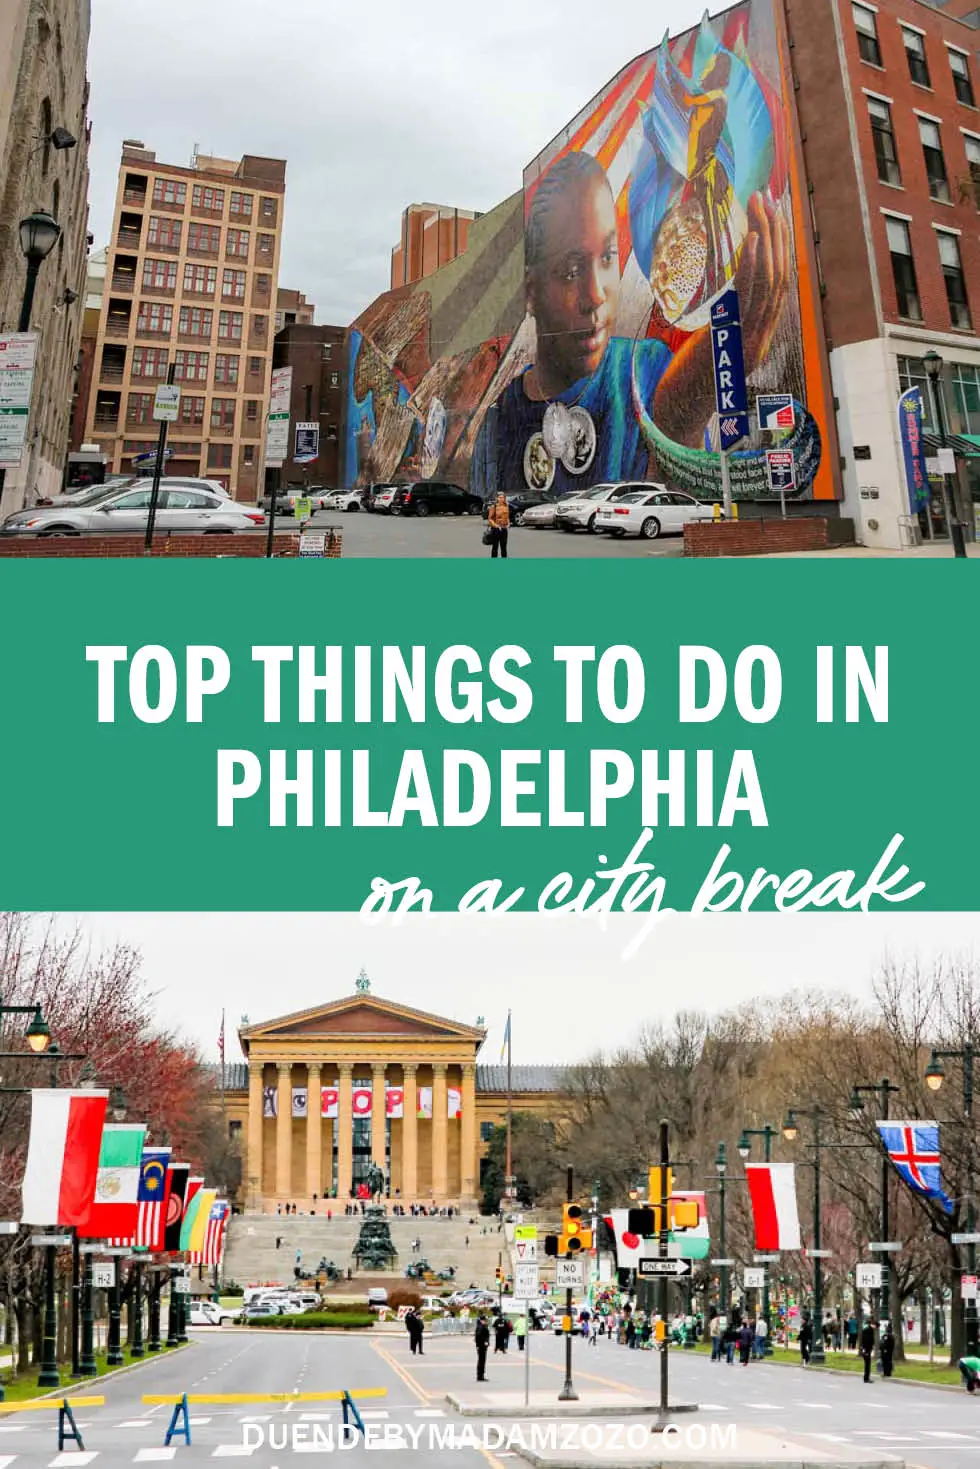 Photos of a large mural on a brick building and a boulevard lined with flags with a yellow neoclassical building at the end. Text overlay reads "Top things to do in Philadelphia on a city break"